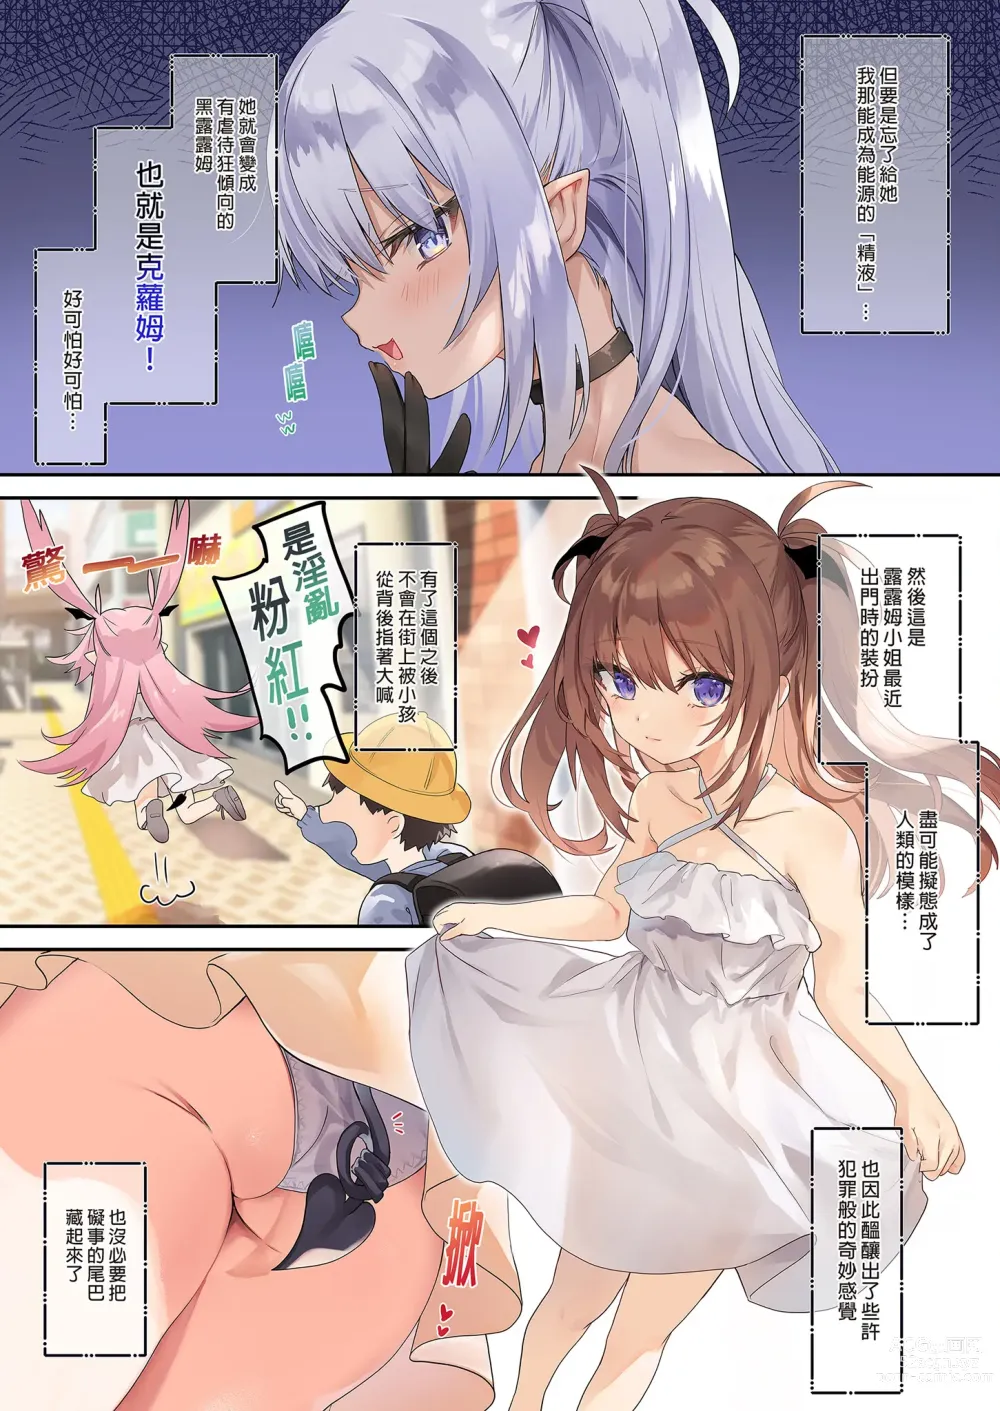 Page 5 of doujinshi 甘甜母乳 魅魔媽媽與暑假 (decensored)